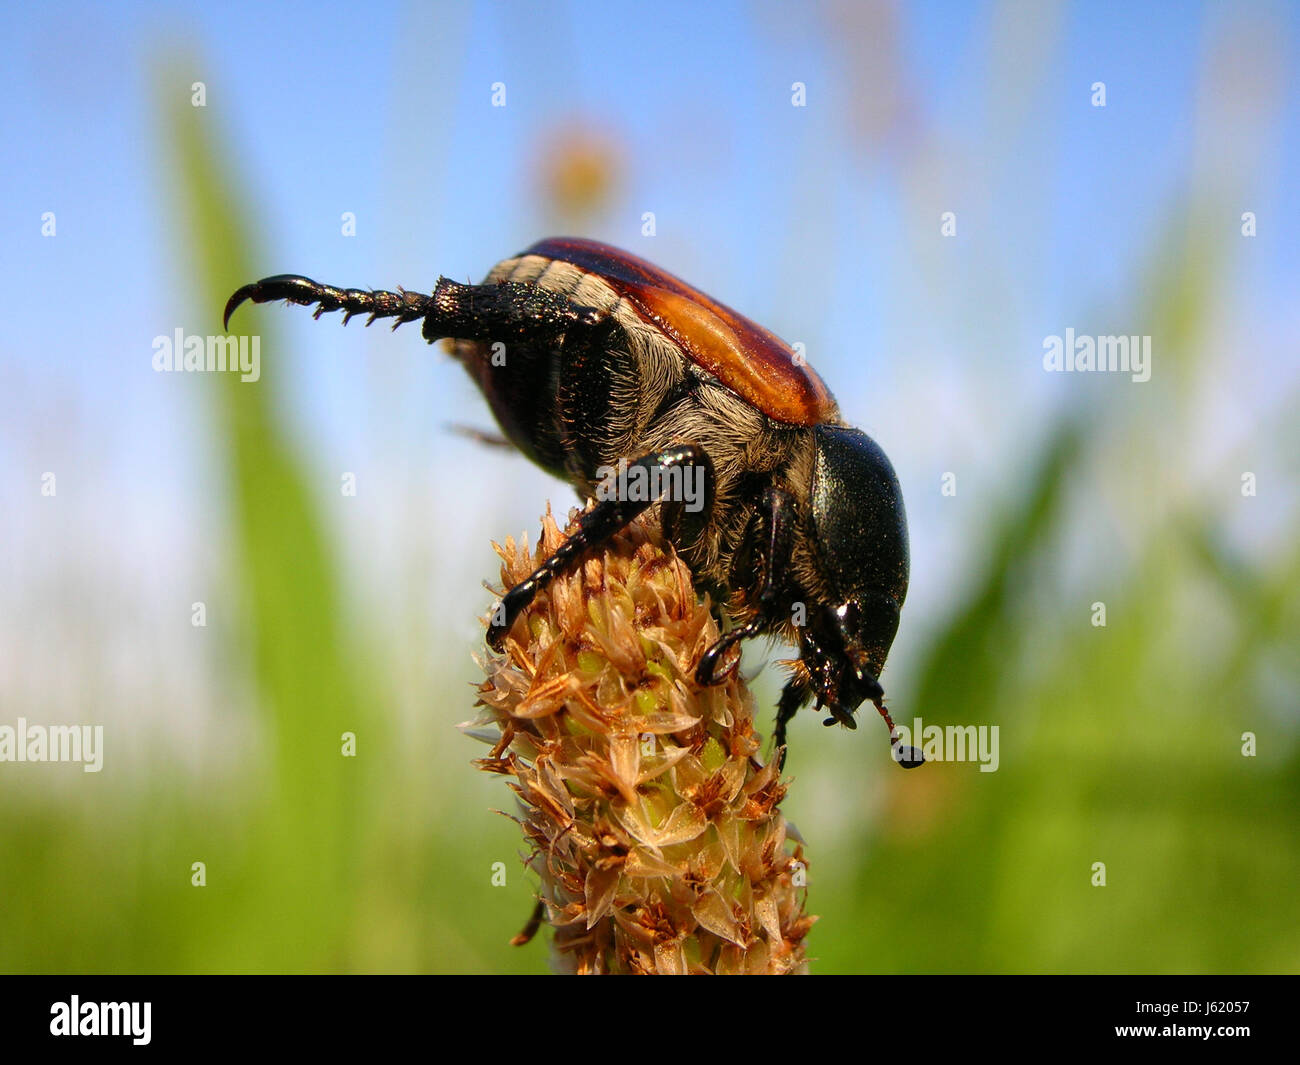 insect scrabble crawling beetle landing land cockchafer awkward headstand Stock Photo